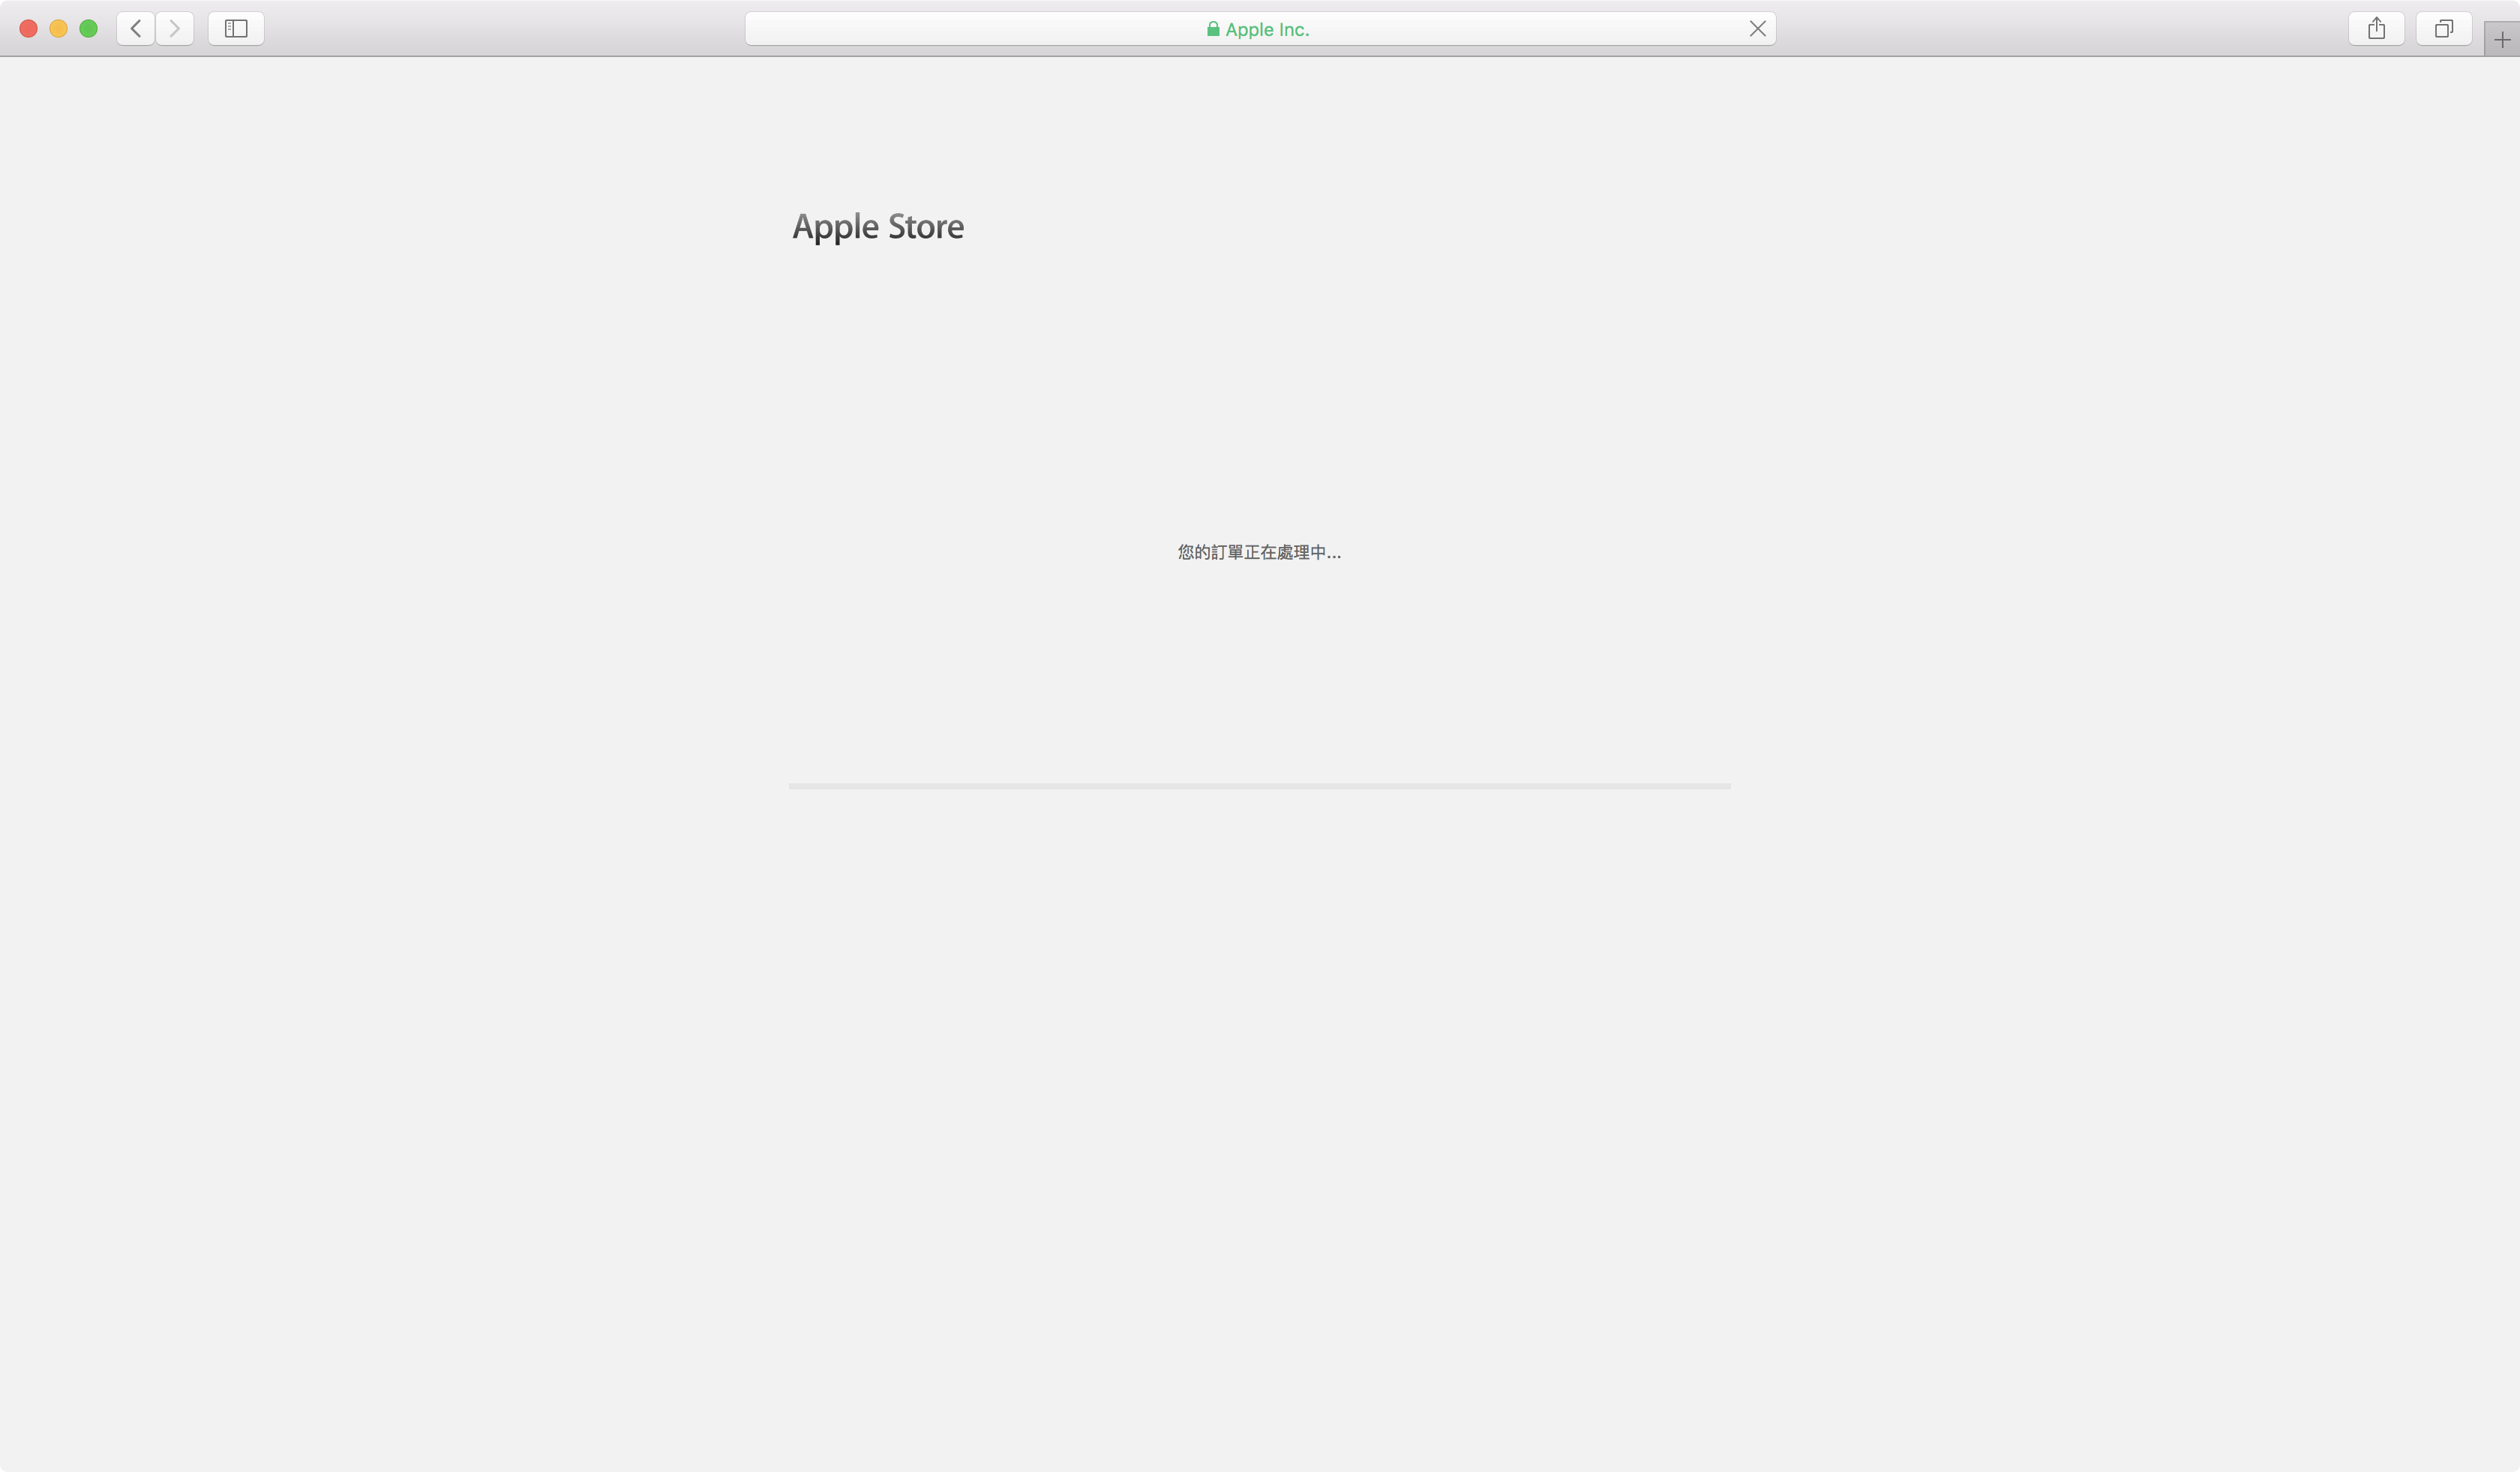 Apple online store - Processing